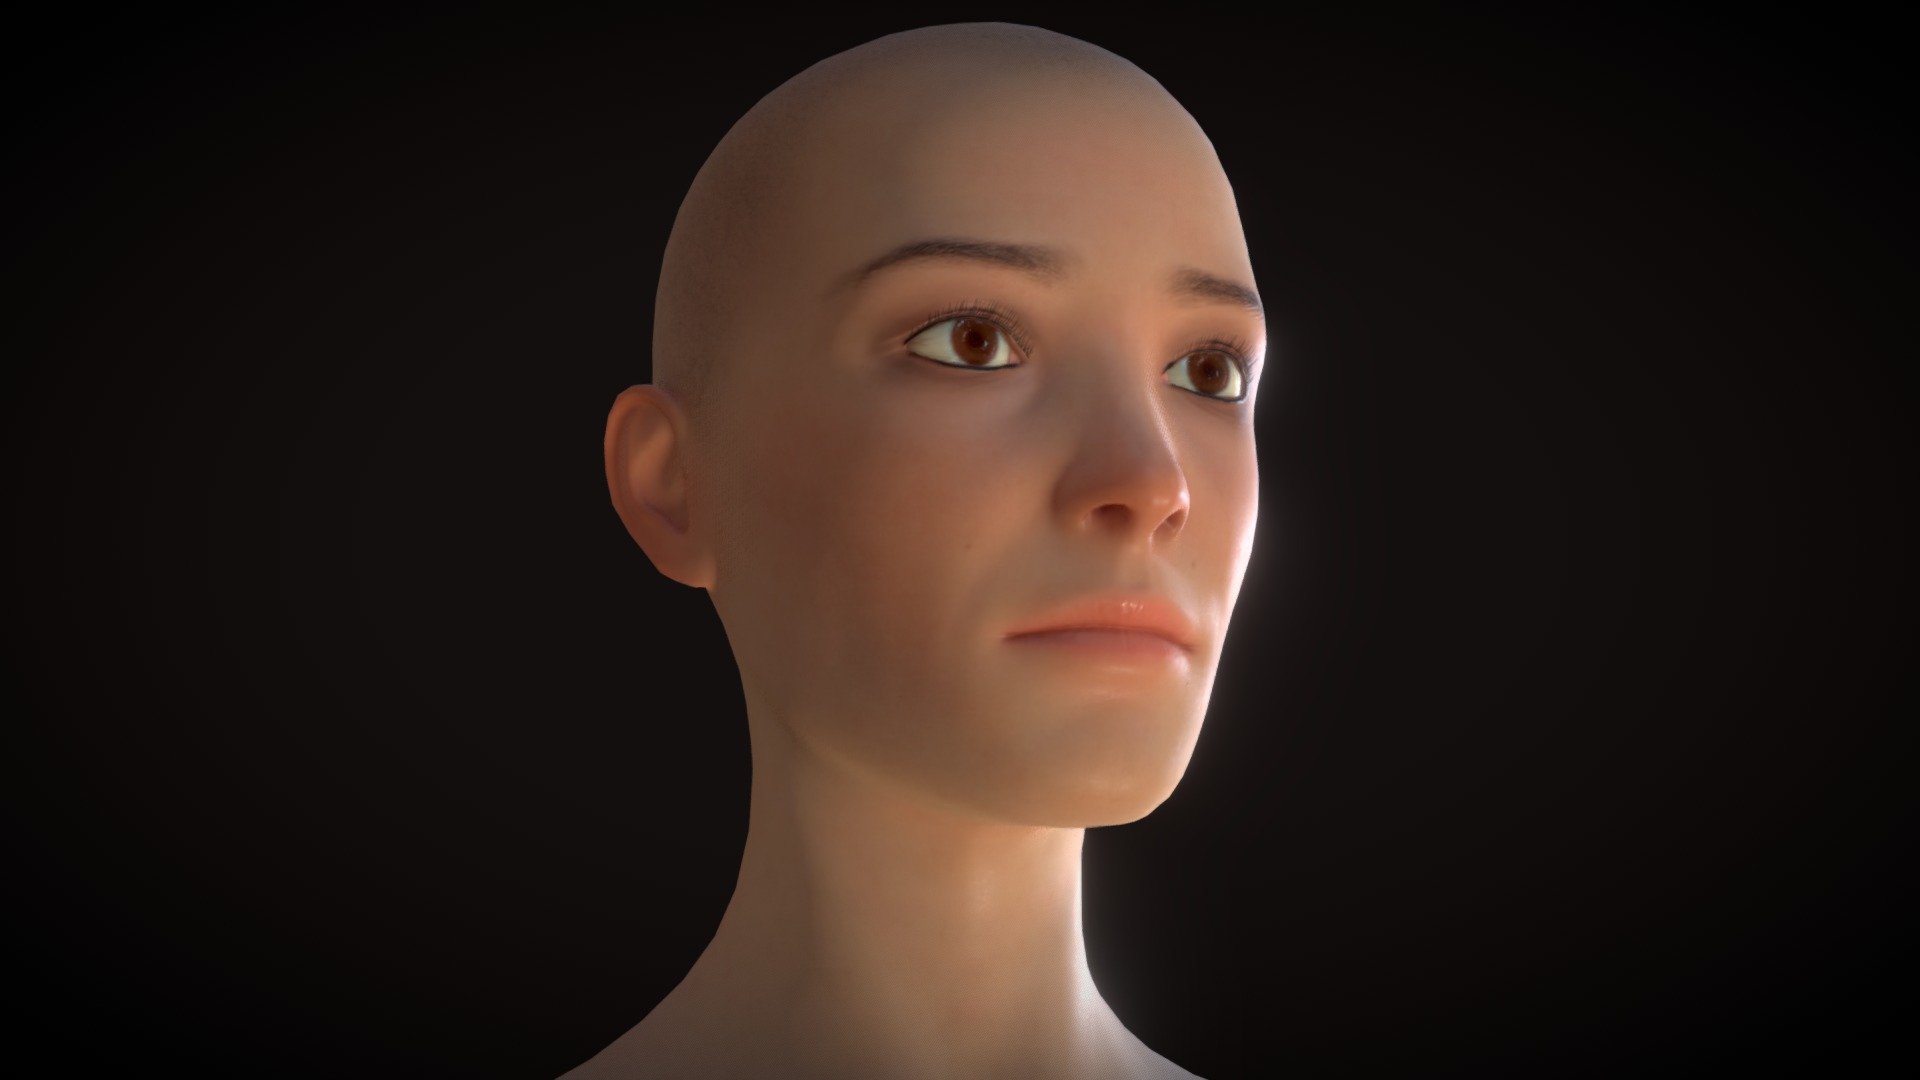 Just a quick test of PBR texturing faking SSS with low emissive.

EDIT : now with true SSS shading - Bald Girl Head [PBR] - 3D model by TOURNERY-BACHEL Thibaud (@Asadar) 3d model